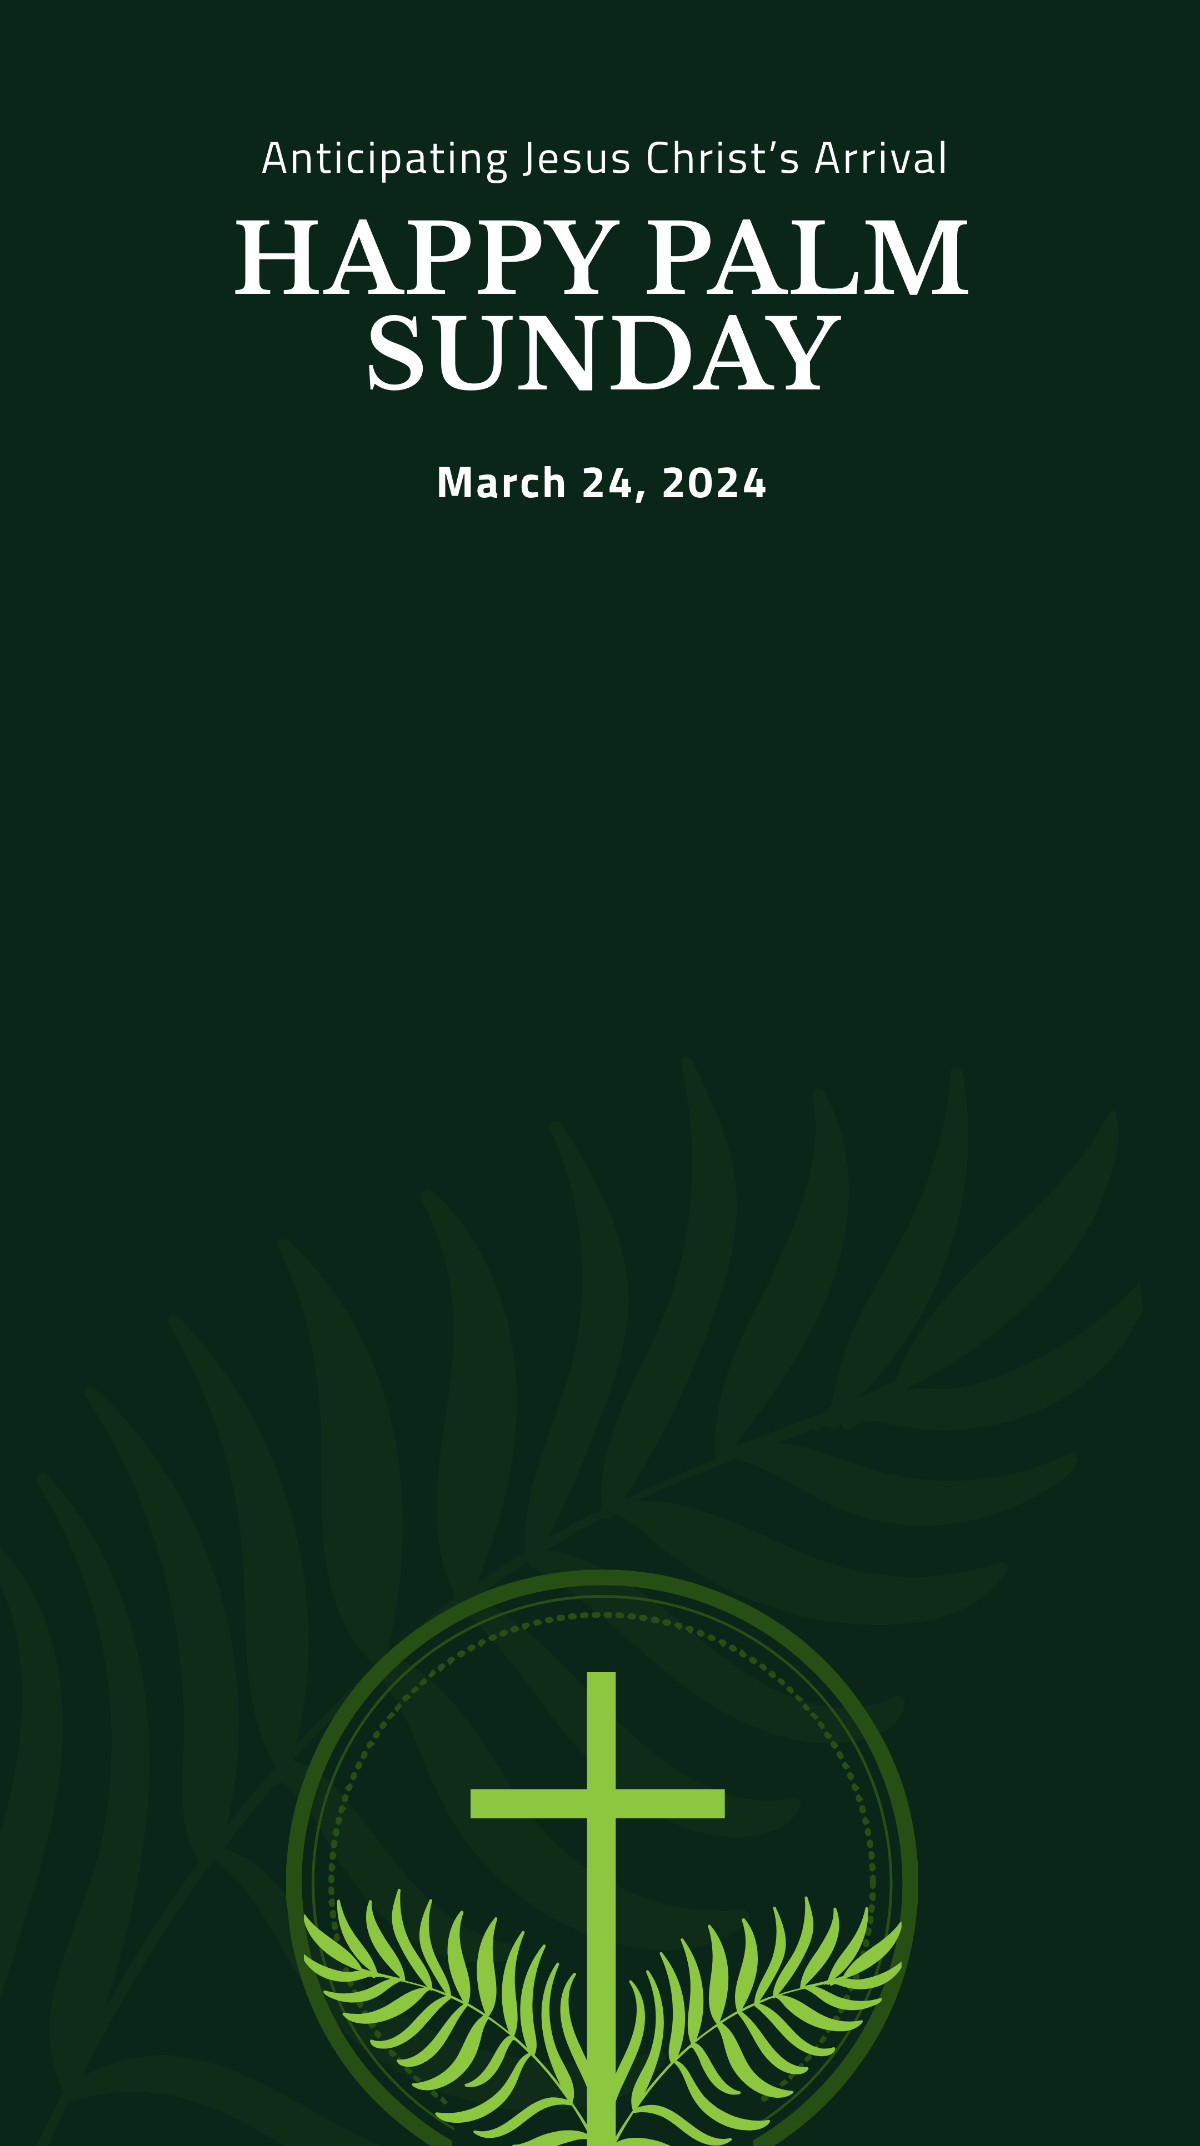 Happy Palm Sunday Snapchat Geofilter Template